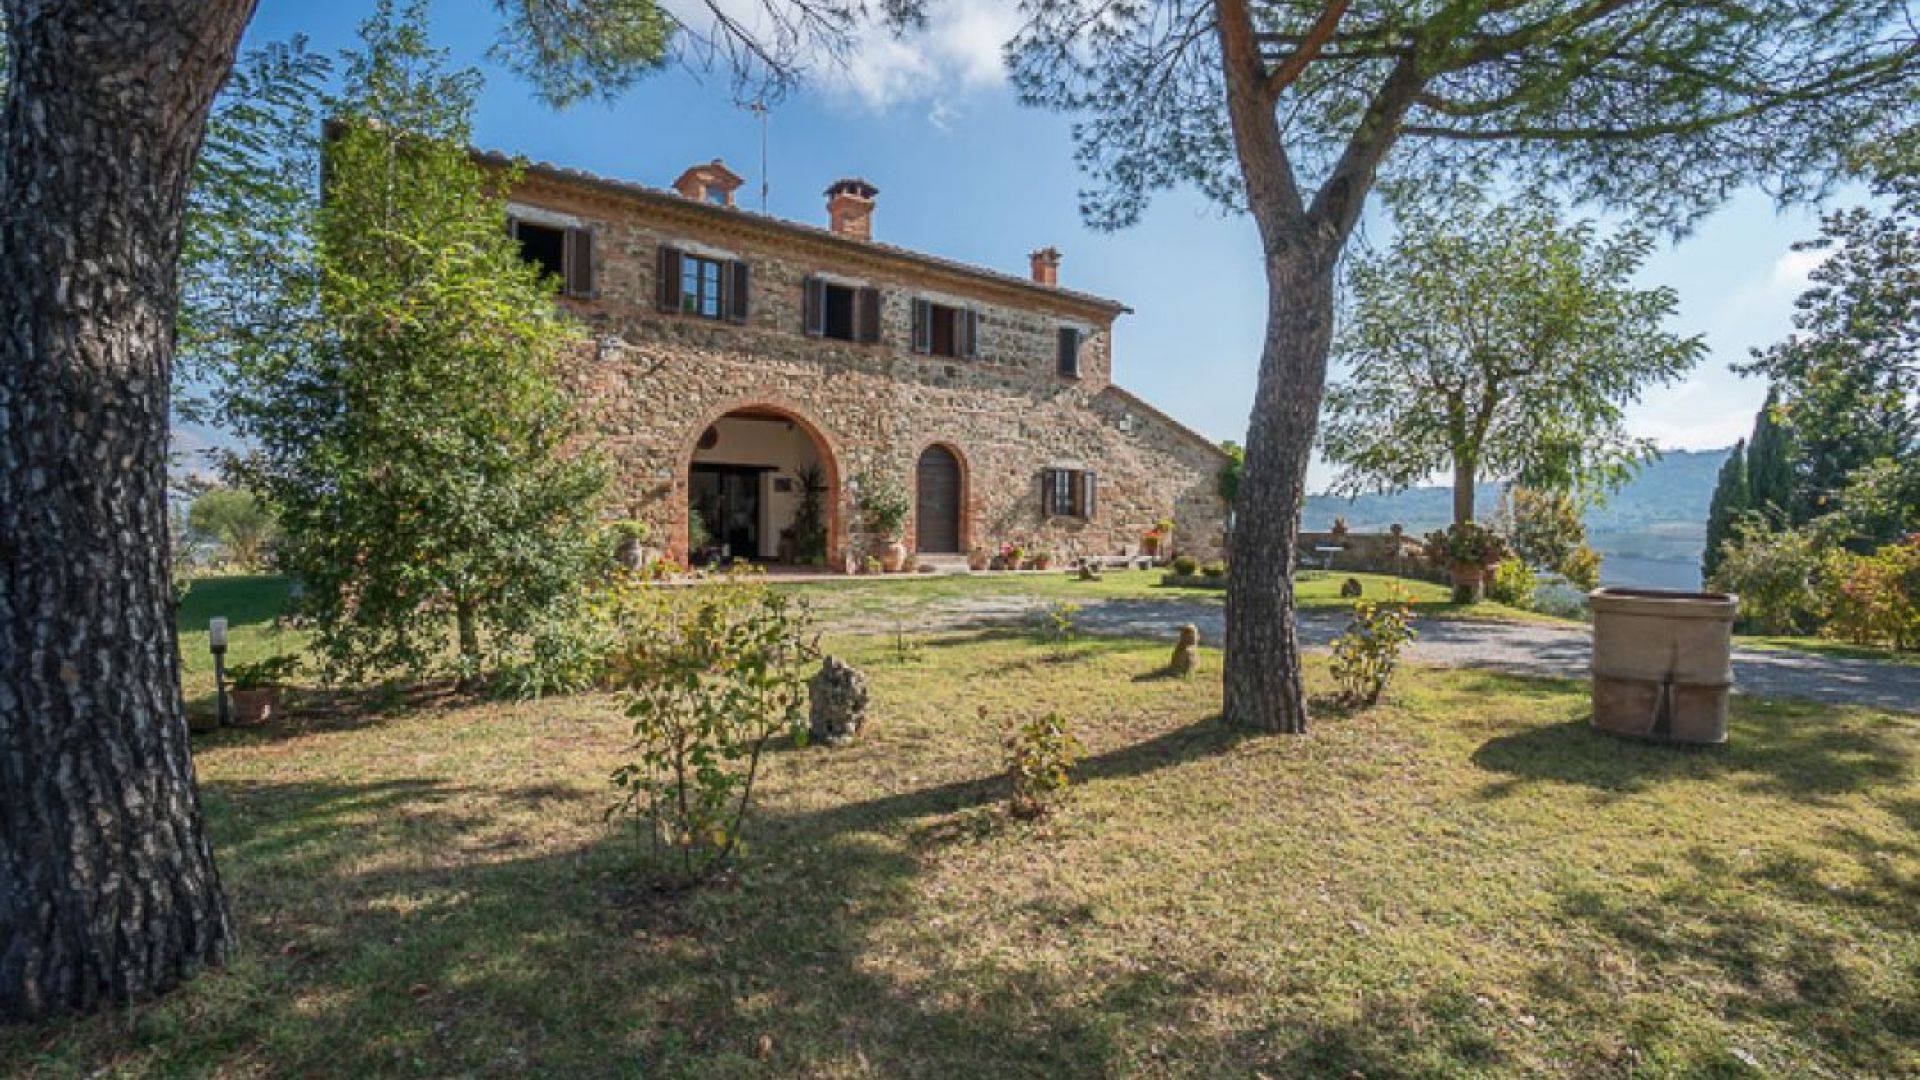 Stunning 18th century stone country house for sale with annexes, garden and swimming pool in Montepulciano, Siena.